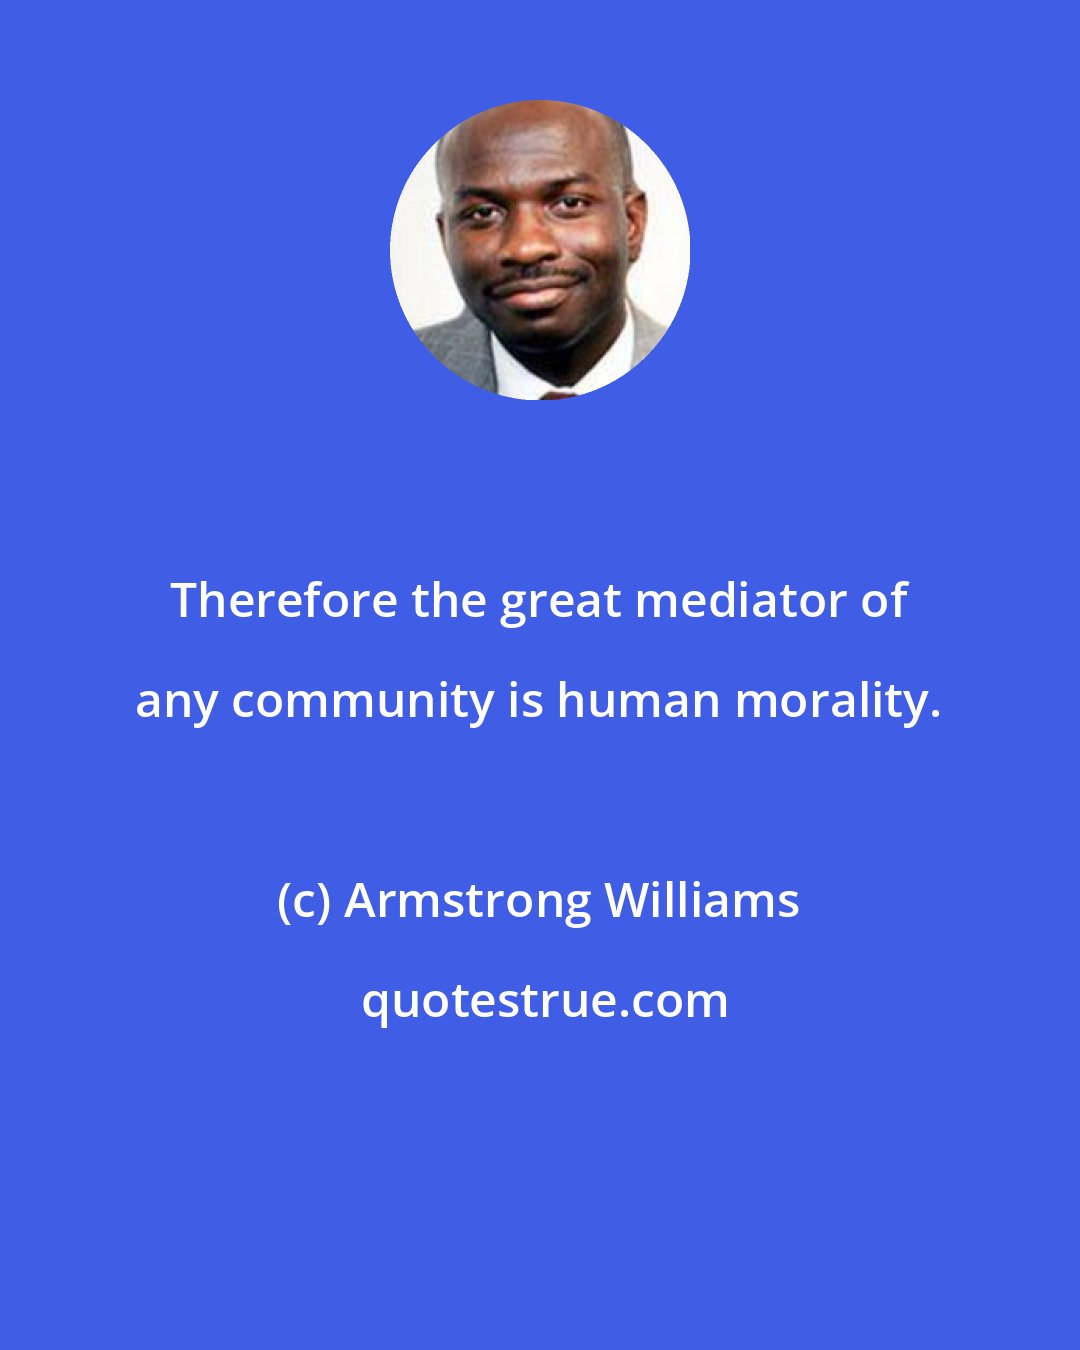 Armstrong Williams: Therefore the great mediator of any community is human morality.